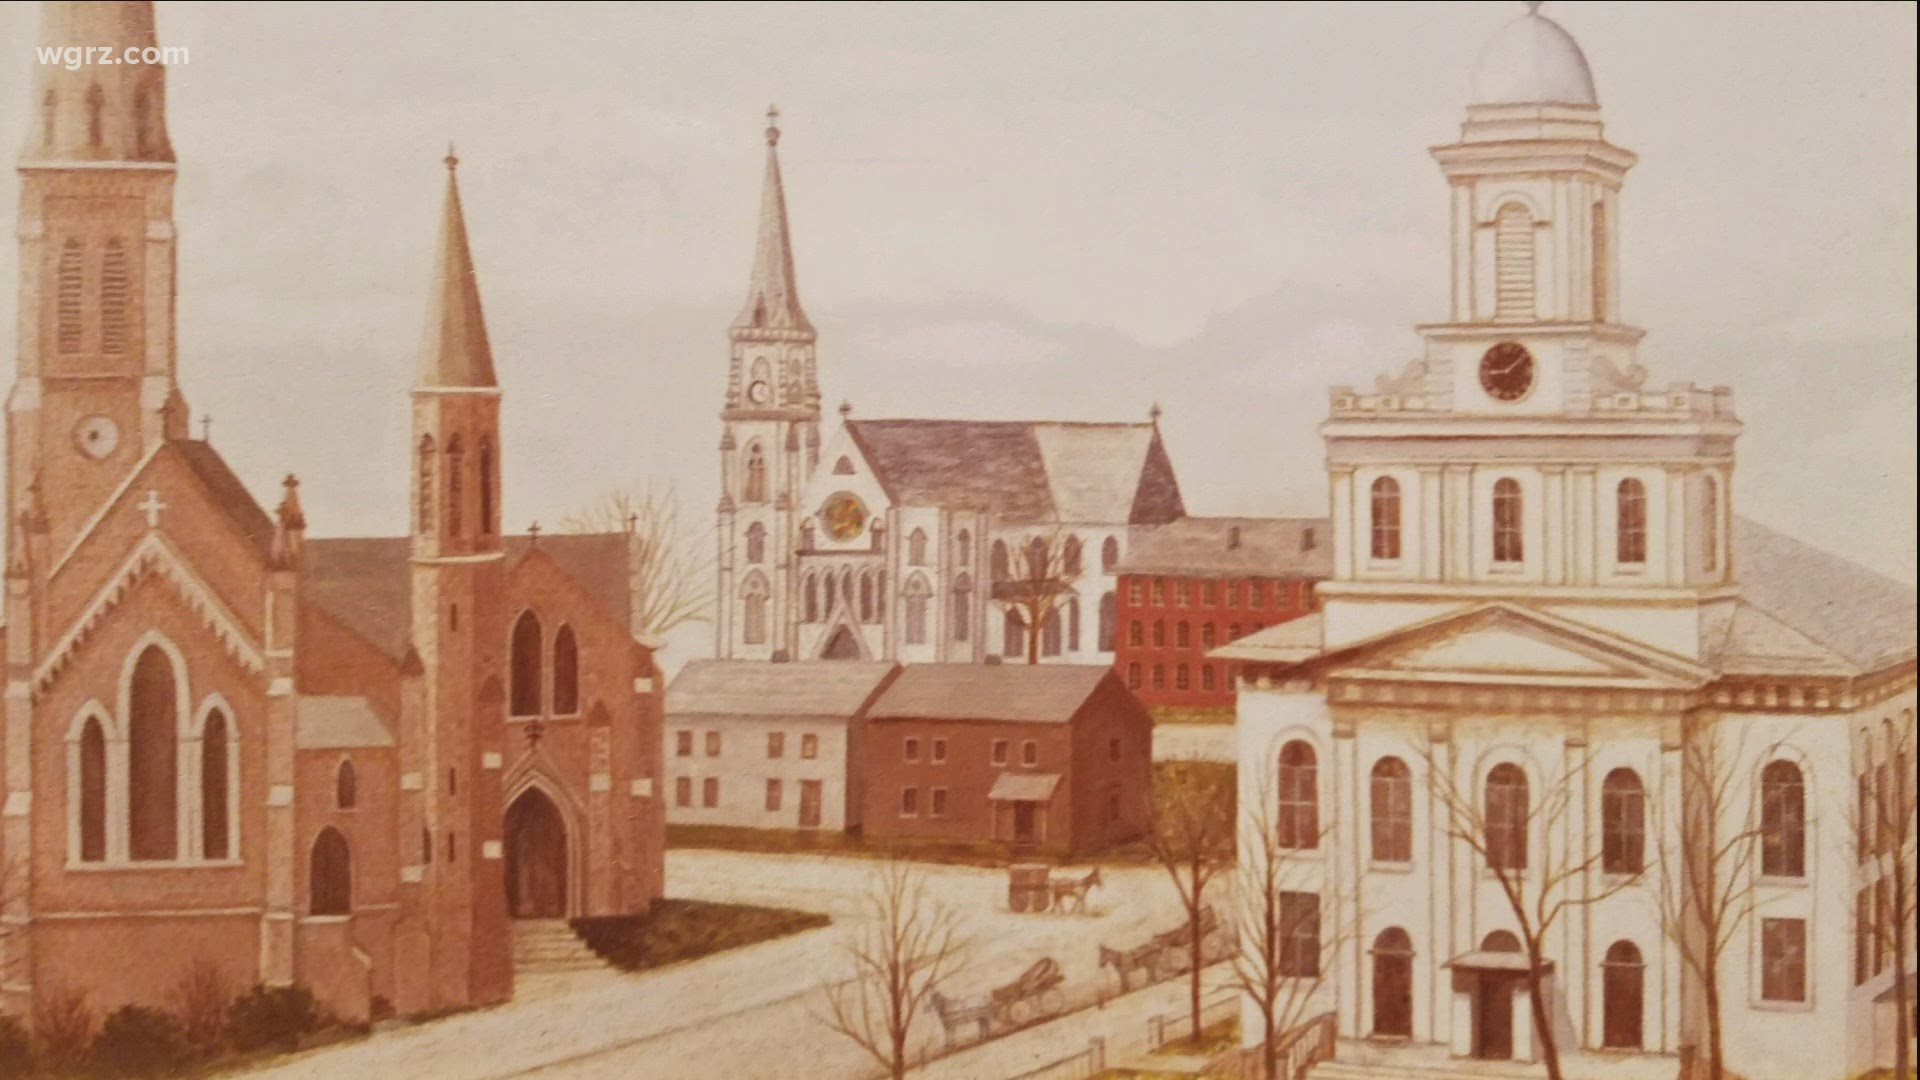 The story behind First Presbyterian's oldest artifact